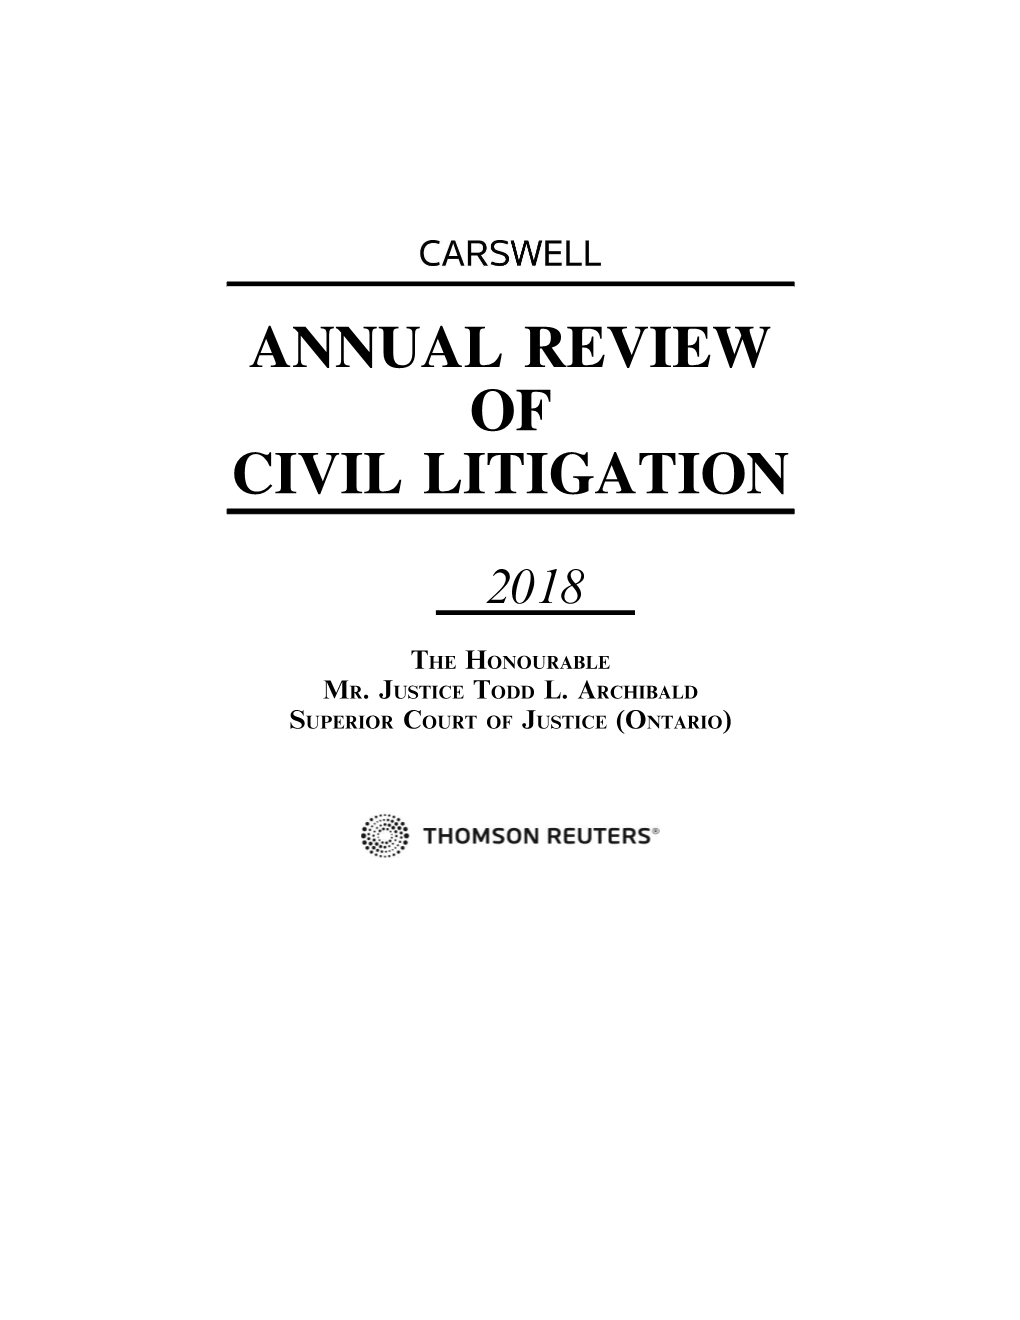 Sexual Aggression and the Civil Response, Annual Review of Civil